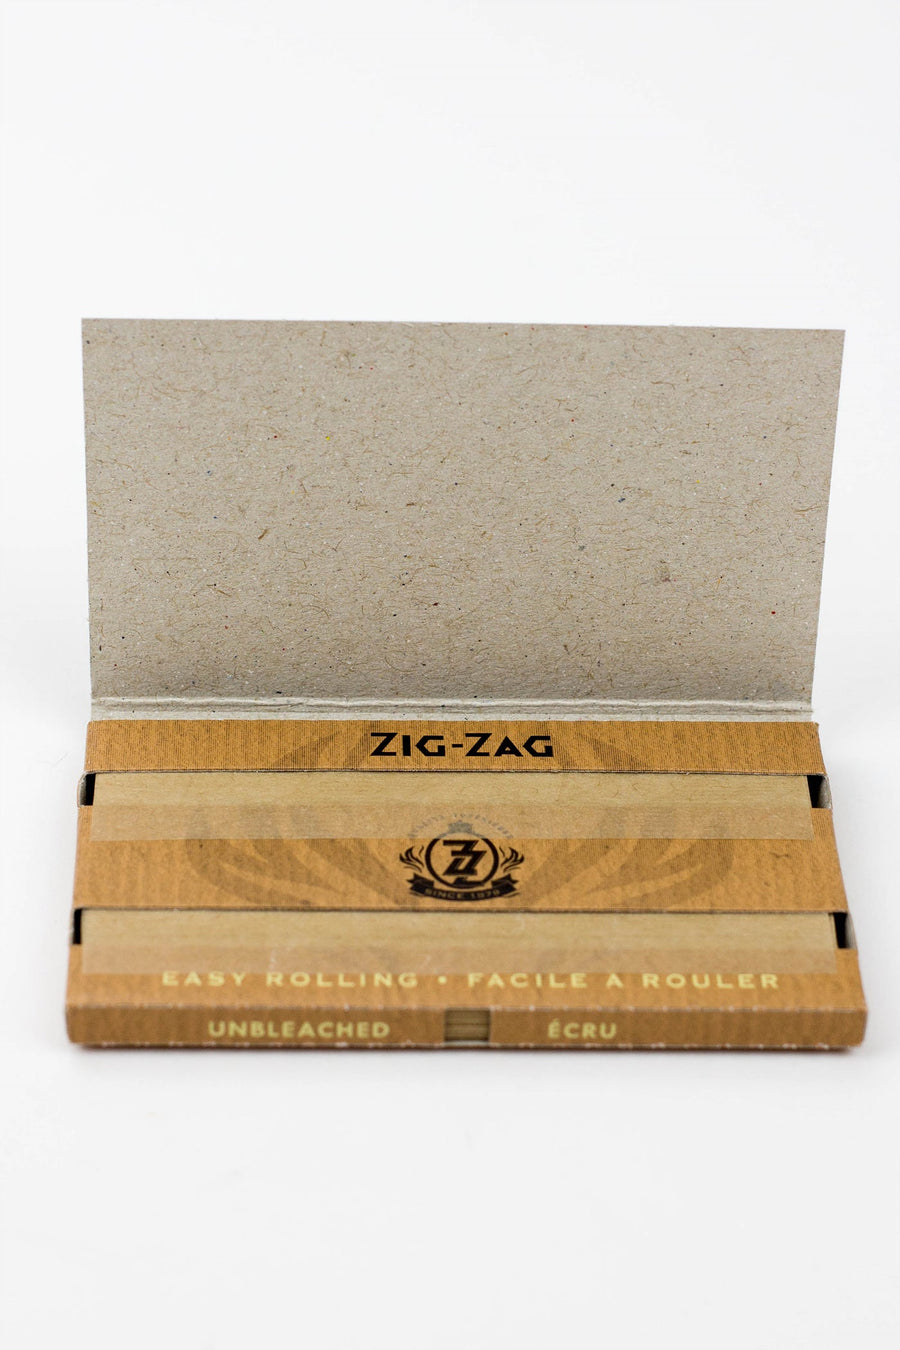 Zig-Zag Unbleached Single Wide Papers_2